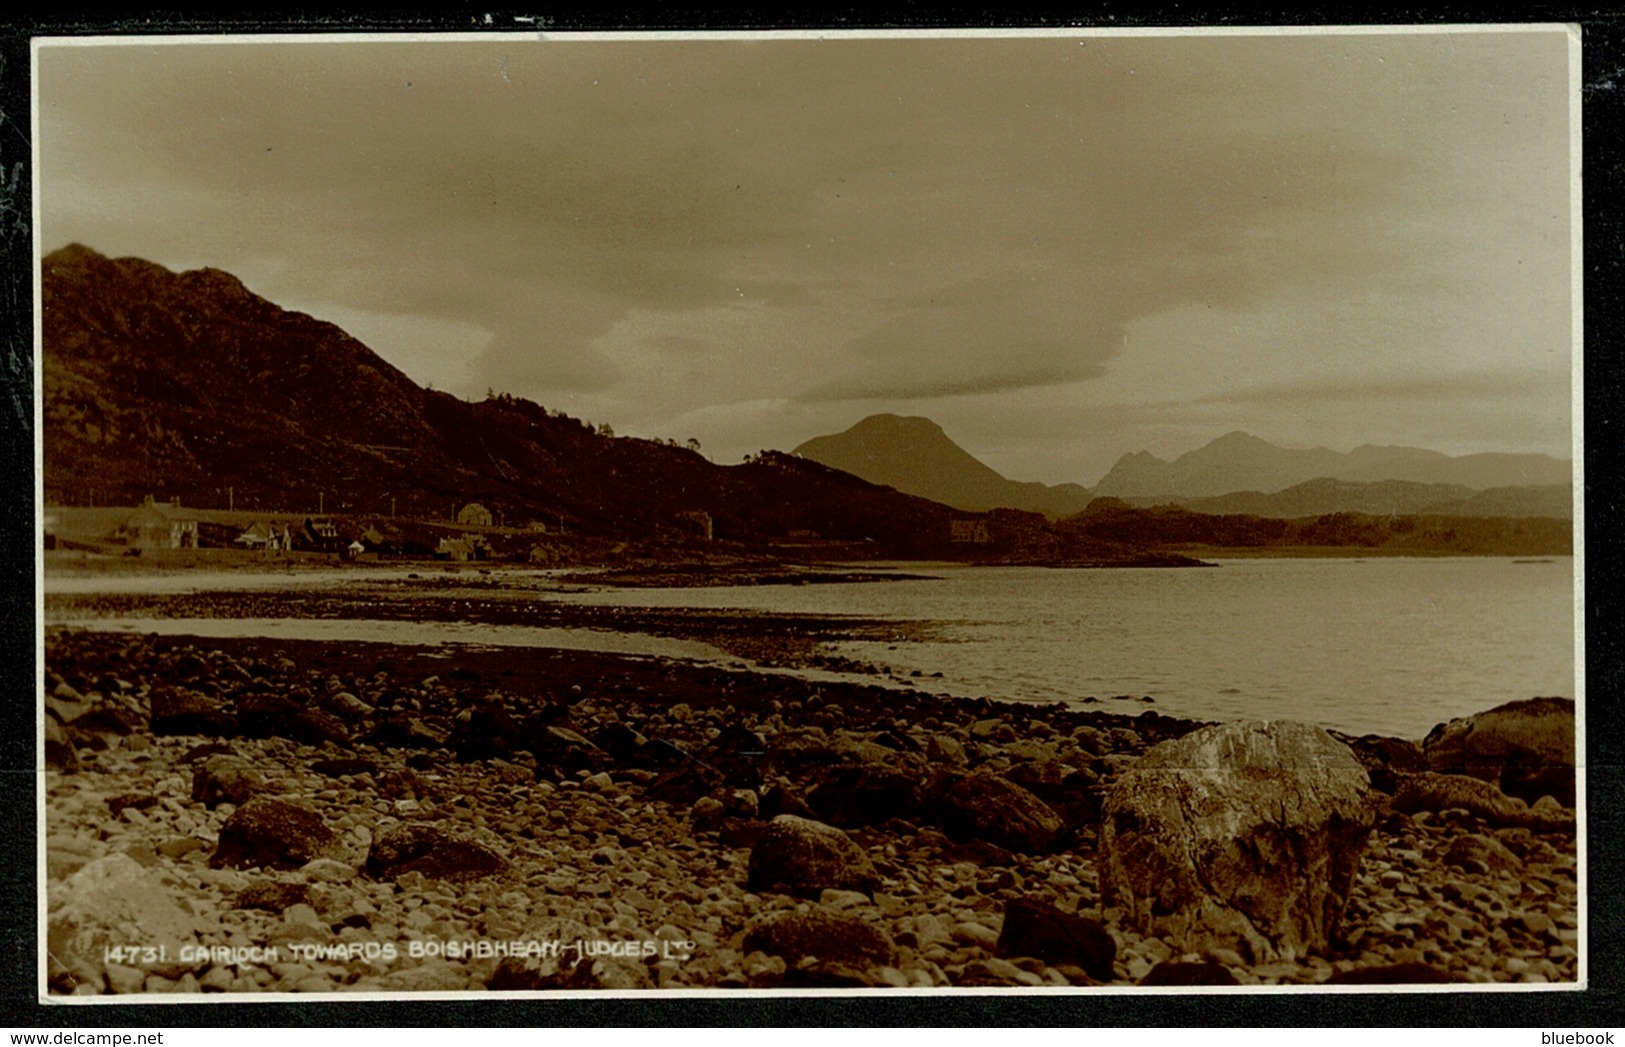 Ref 1322 - Judges Real Photo Postcard - Gairloch Looking Towards Boishbhean - Wester Ross - Ross & Cromarty